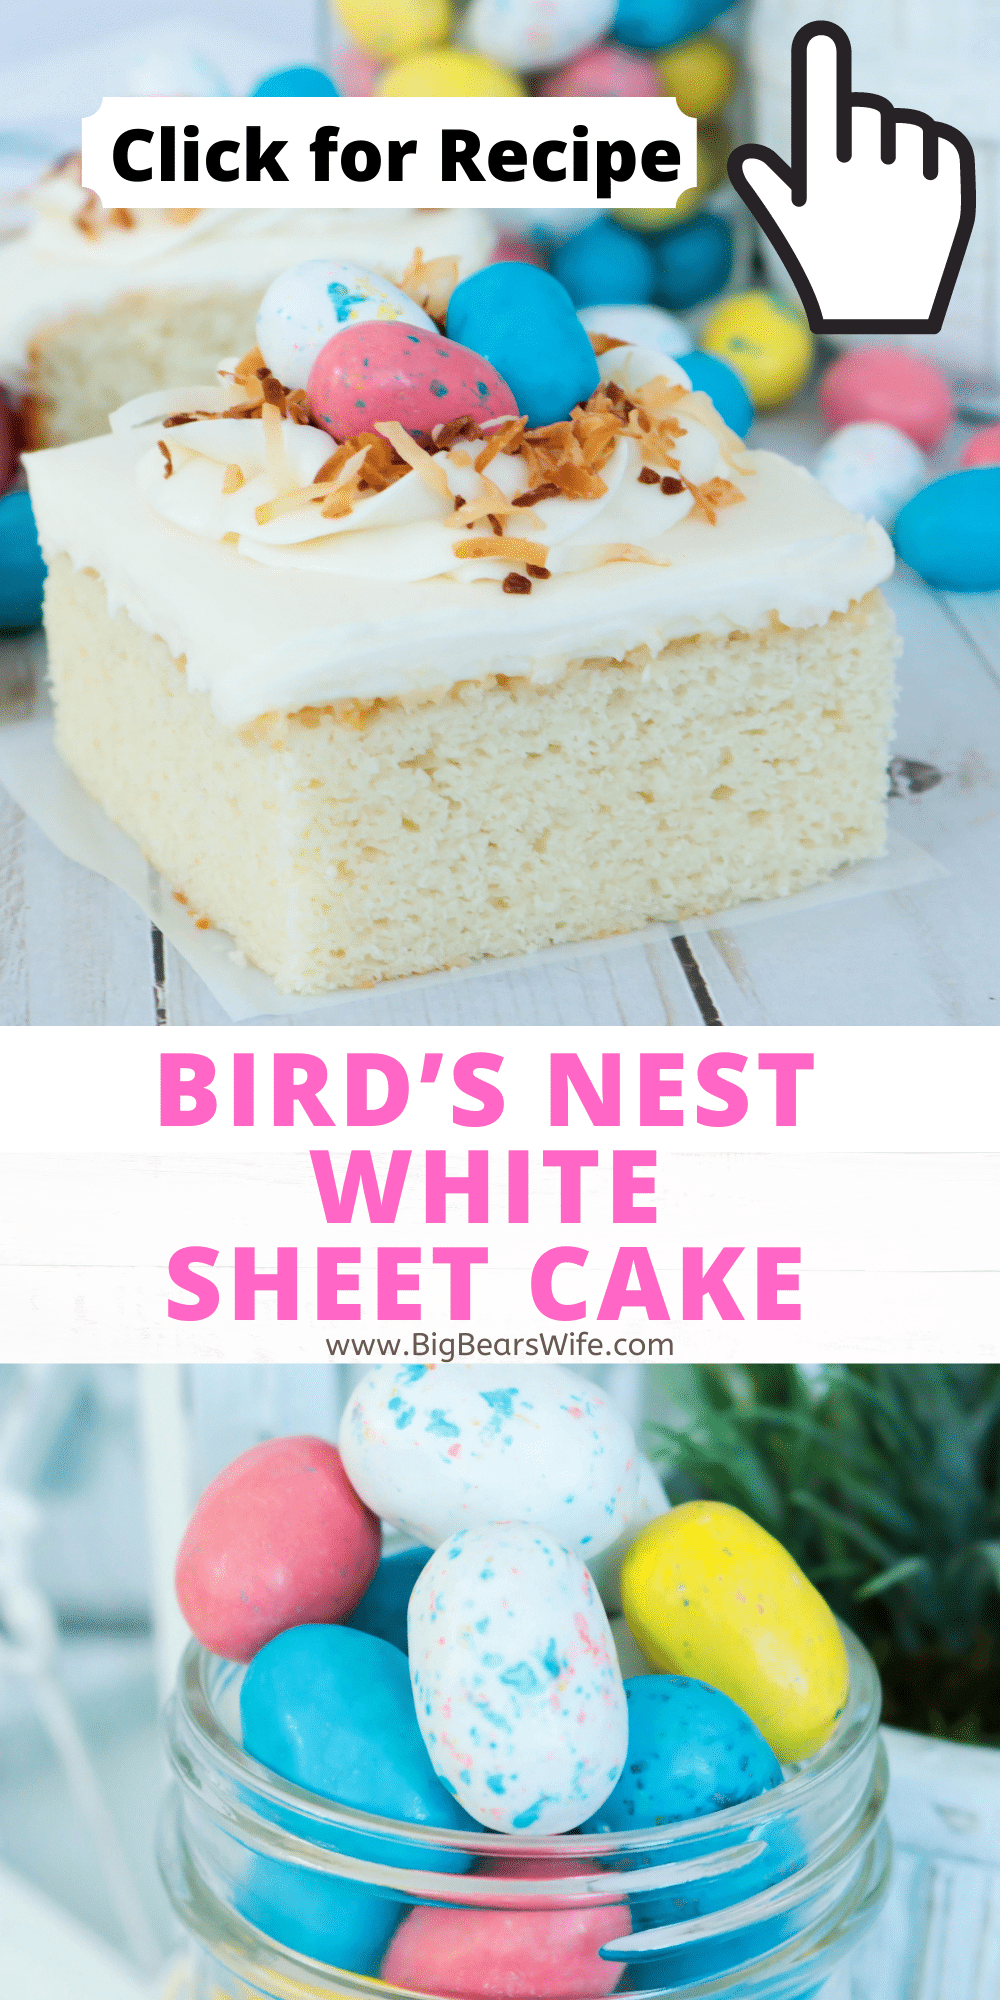 Hosting Easter dinner or Mother's day brunch? Making a cake for Sunday's Church Potluck or a baby shower? This quick and easy Bird’s Nest White Sheet Cake is just what you need! This semi-homemade recipe starts with a box cake mix which we top with a homemade white frosting and decorate with a simple bird nest made of icing and toasted coconut and Robin  Egg candies. via @bigbearswife